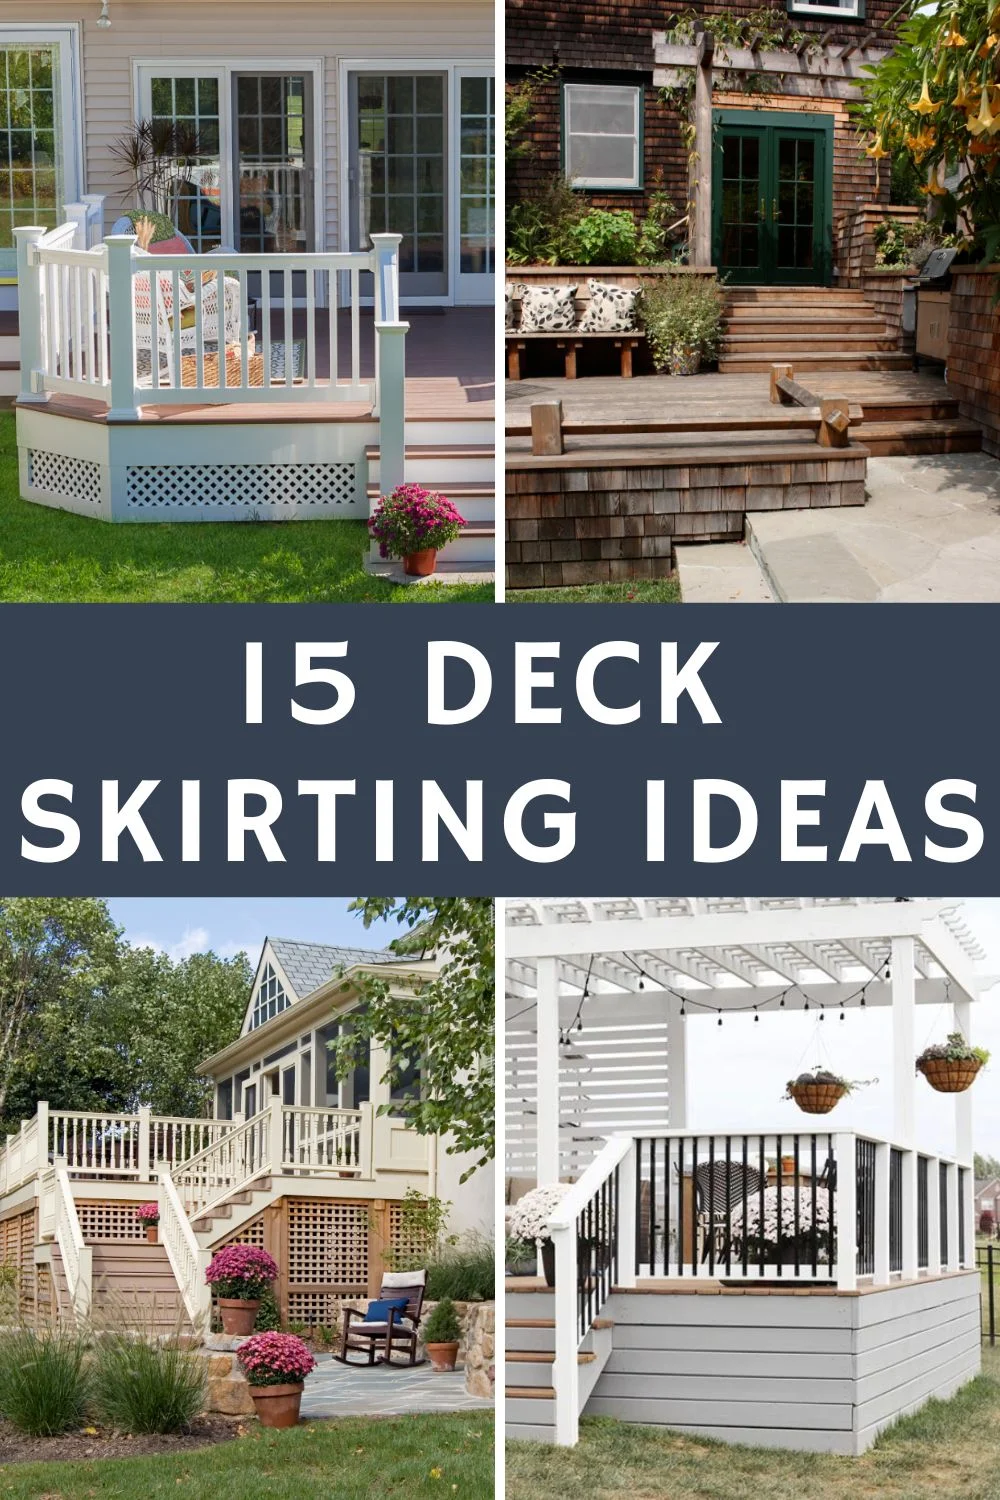 15 Deck Skirting Ideas to Enhance Your Outdoor Space